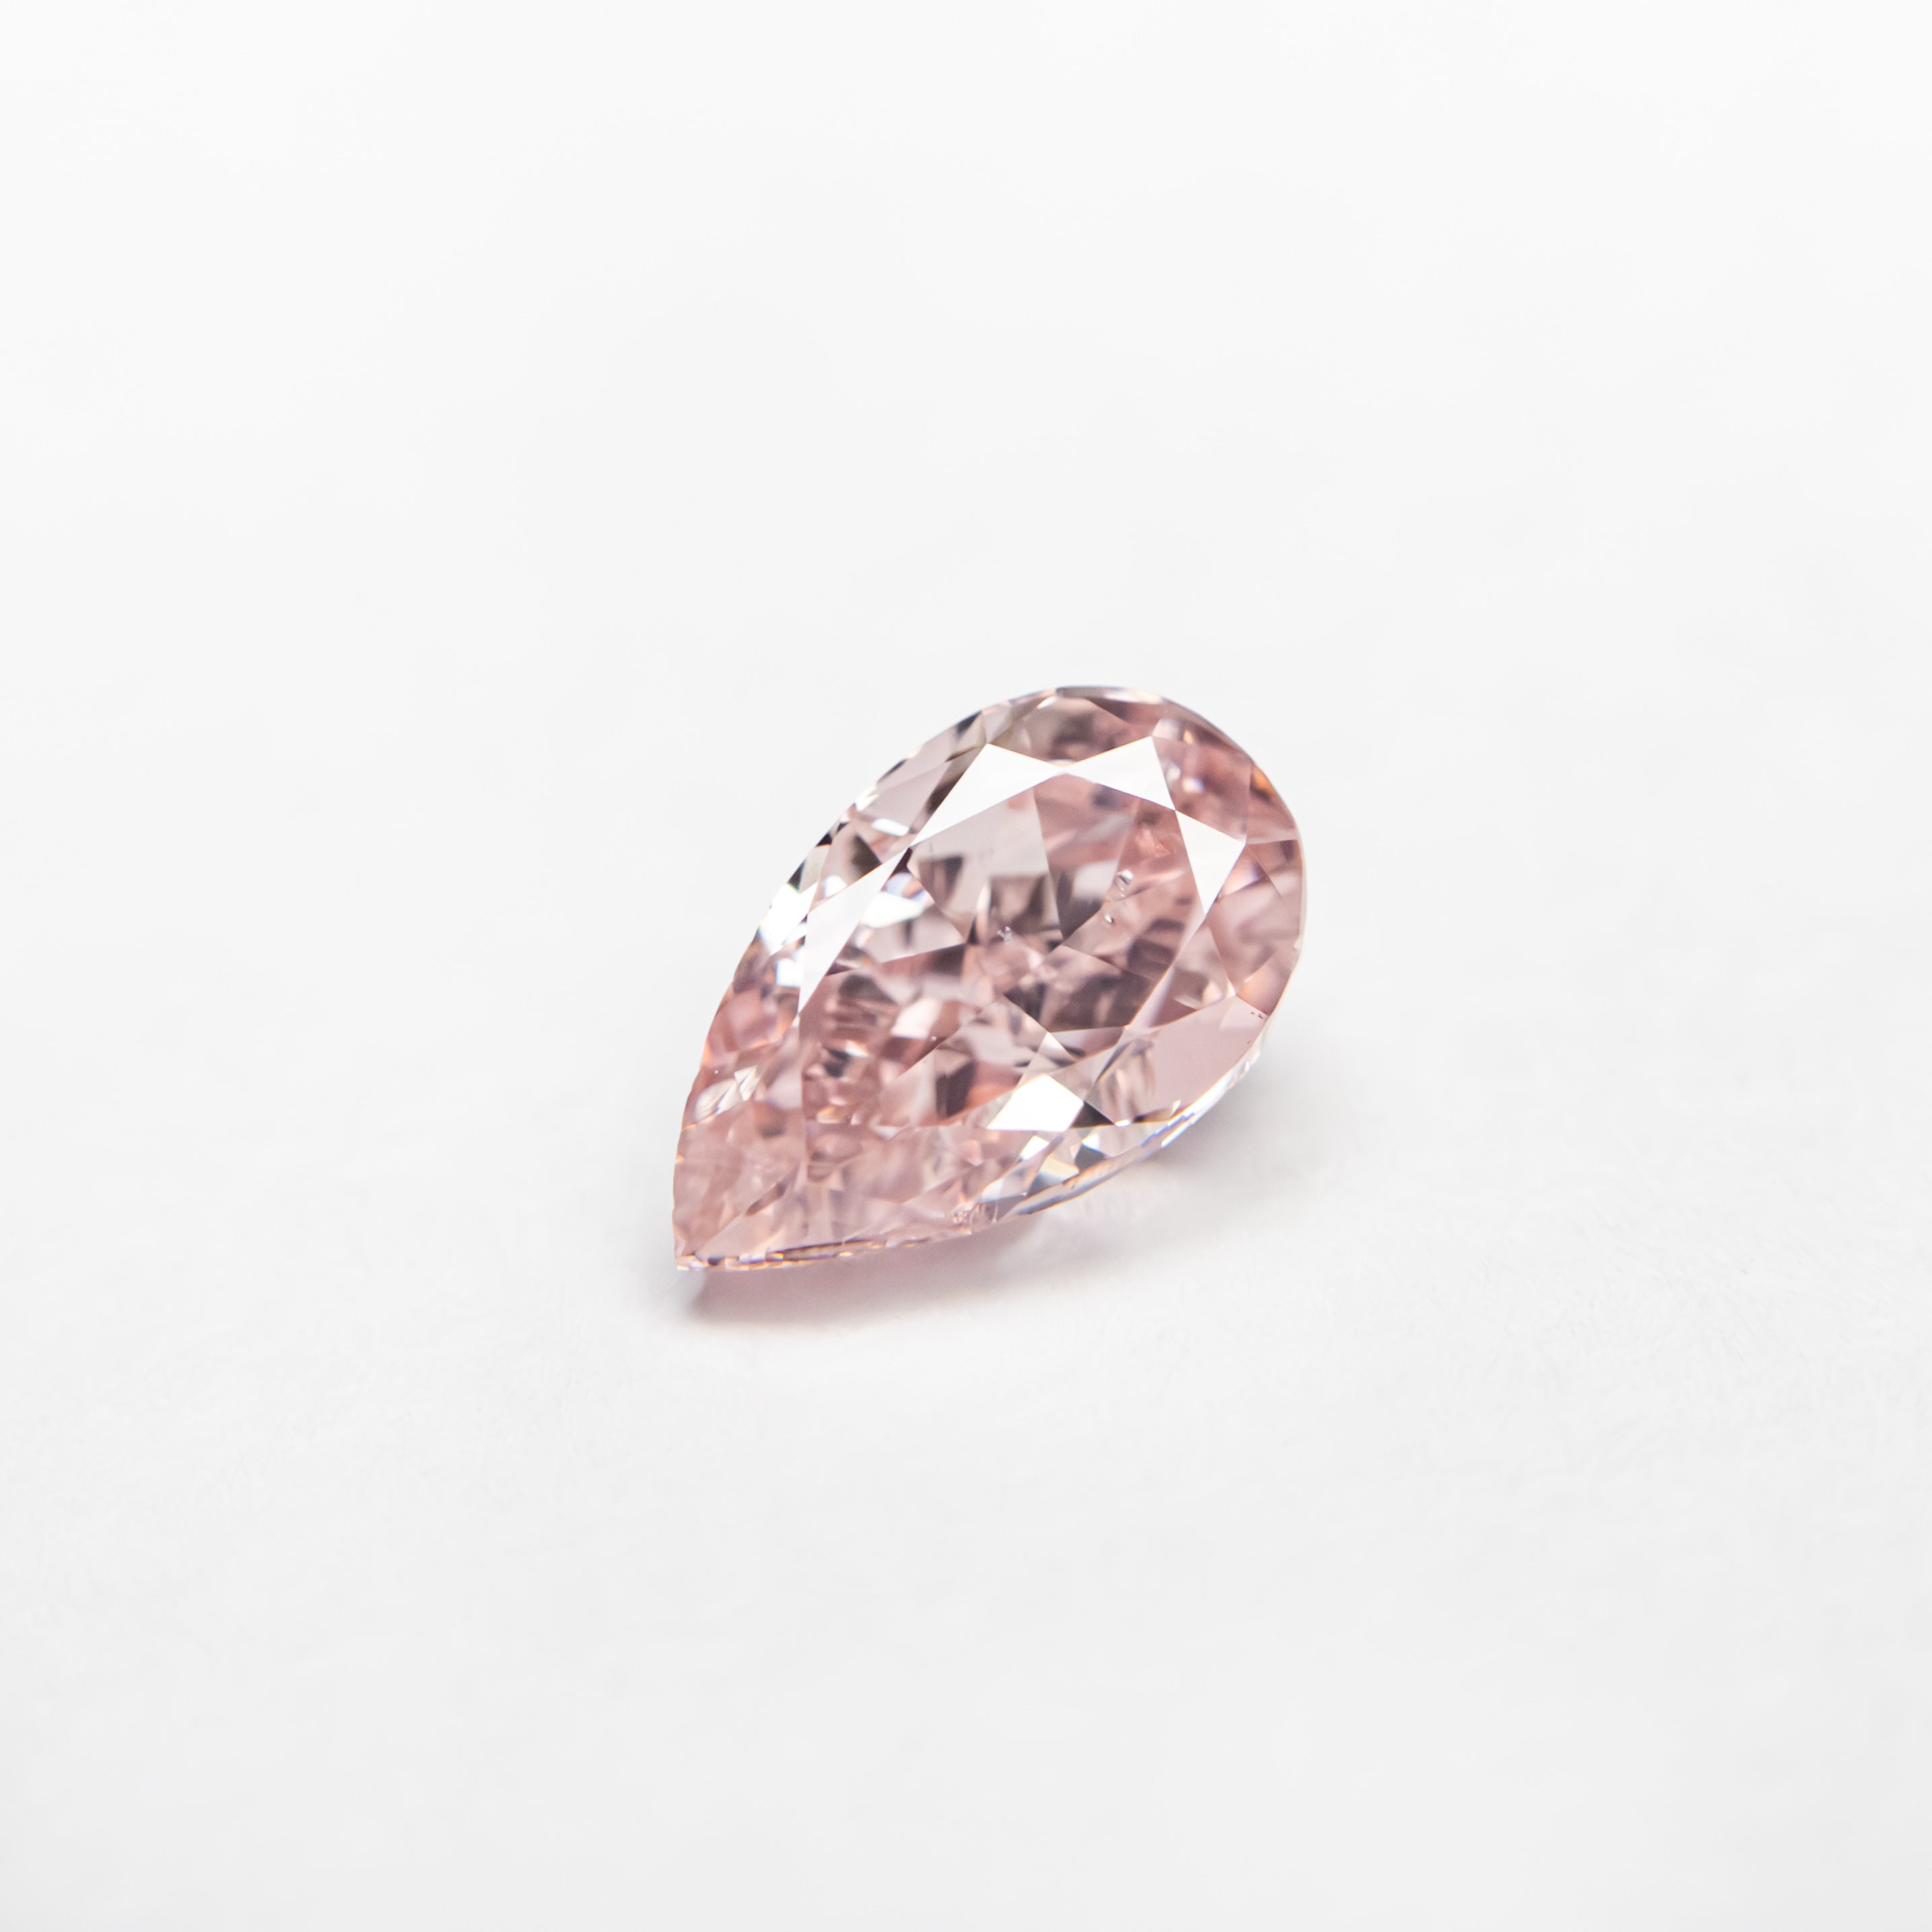 0.50ct 6.21x3.75x2.84mm GIA SI2 Fancy Pink Pear Brilliant 24130-01